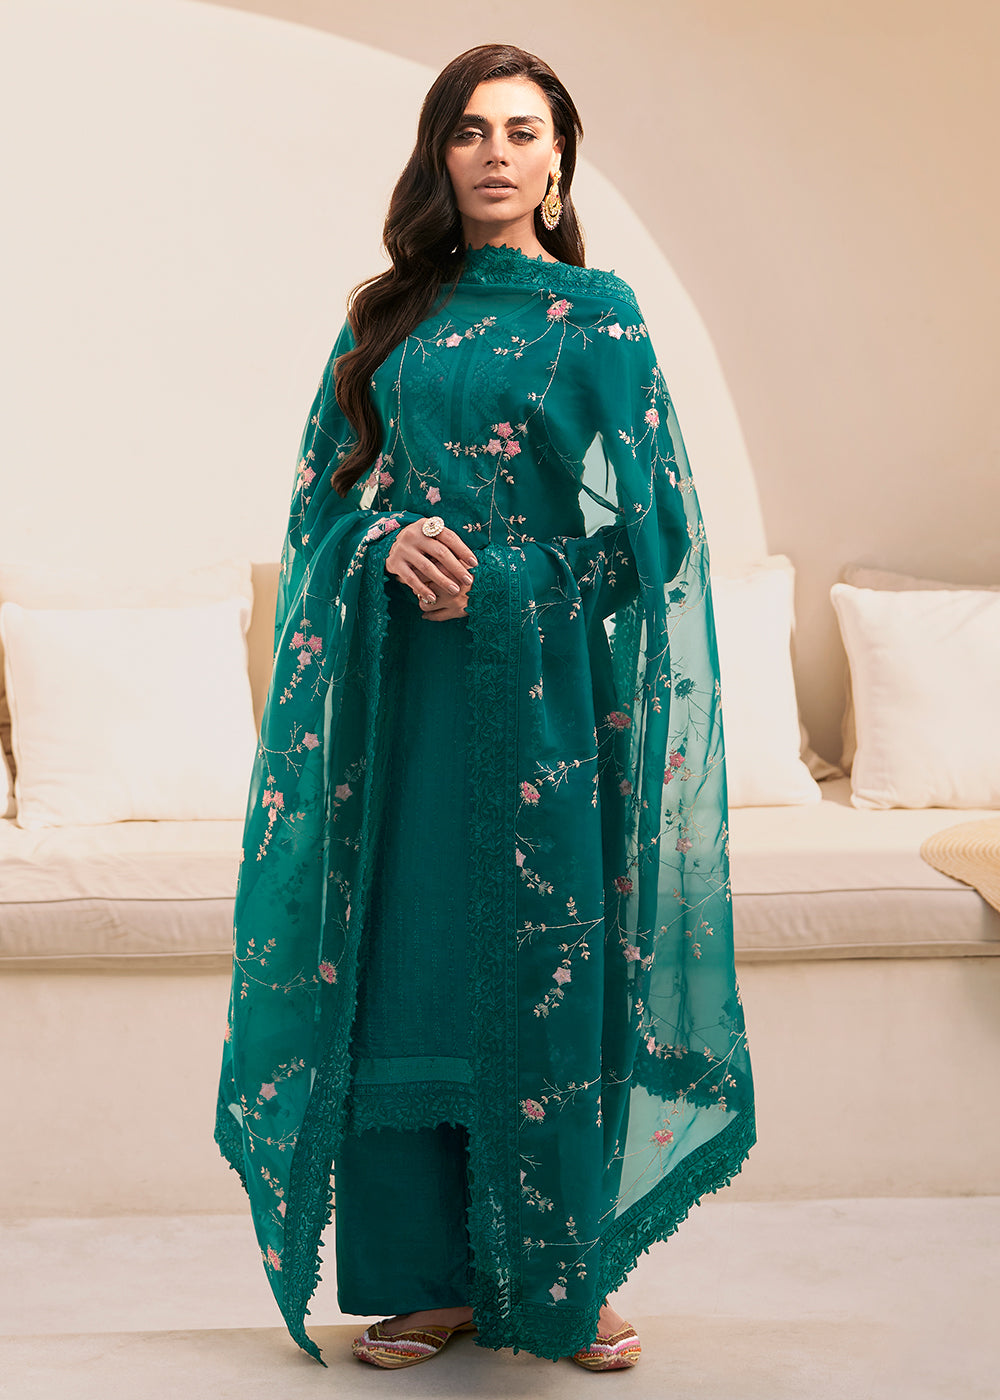 Buy Now Embroidered Green Dola Silk Festive Style Salwar Suit Online in USA, UK, Canada, Germany, Australia & Worldwide at Empress Clothing.